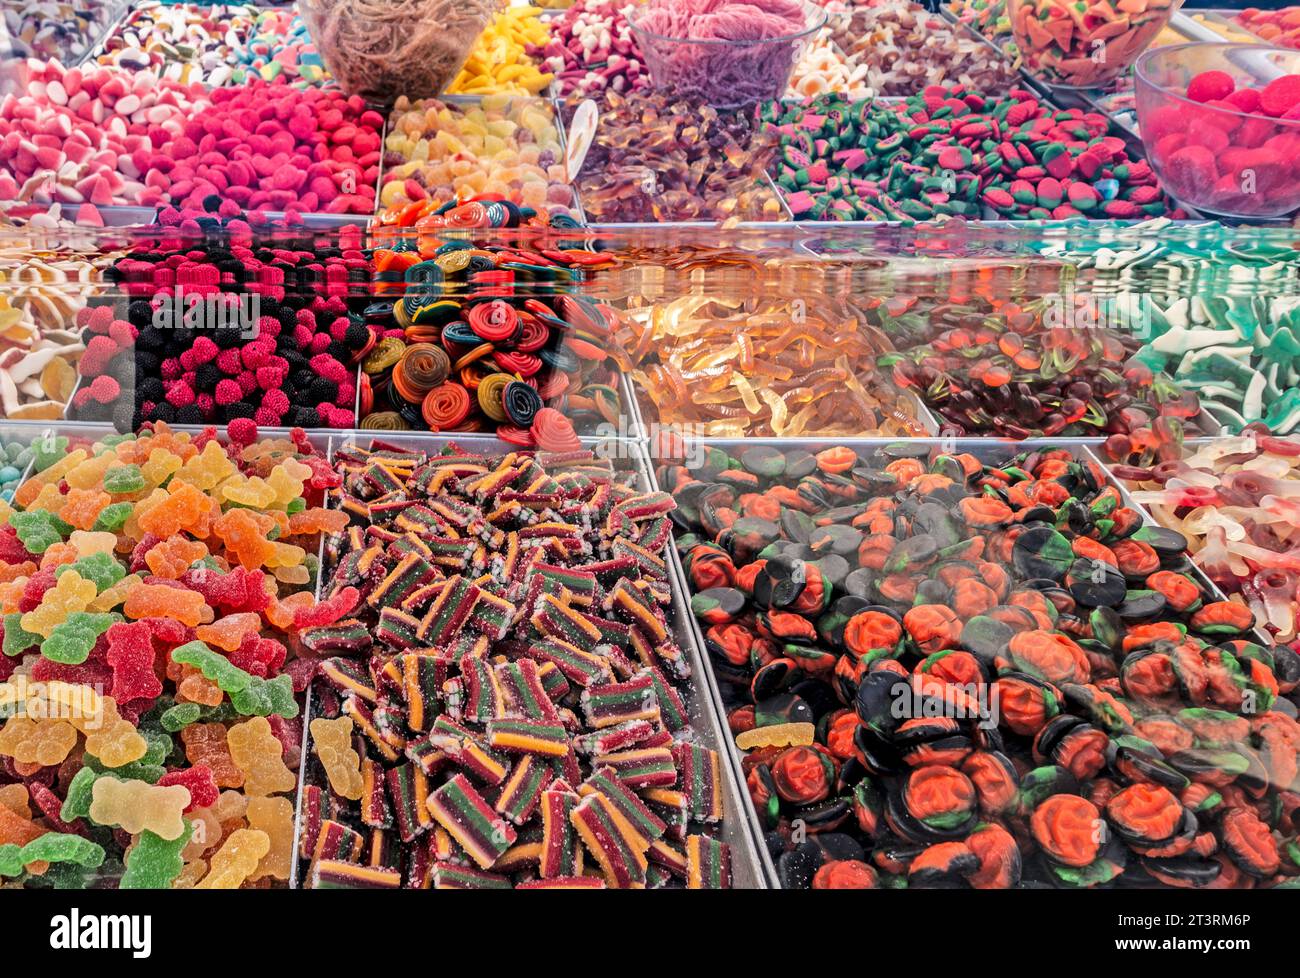 A selection of colourful sweets on sale at a market stall in Polignano a Mare, Italy. Stock Photo